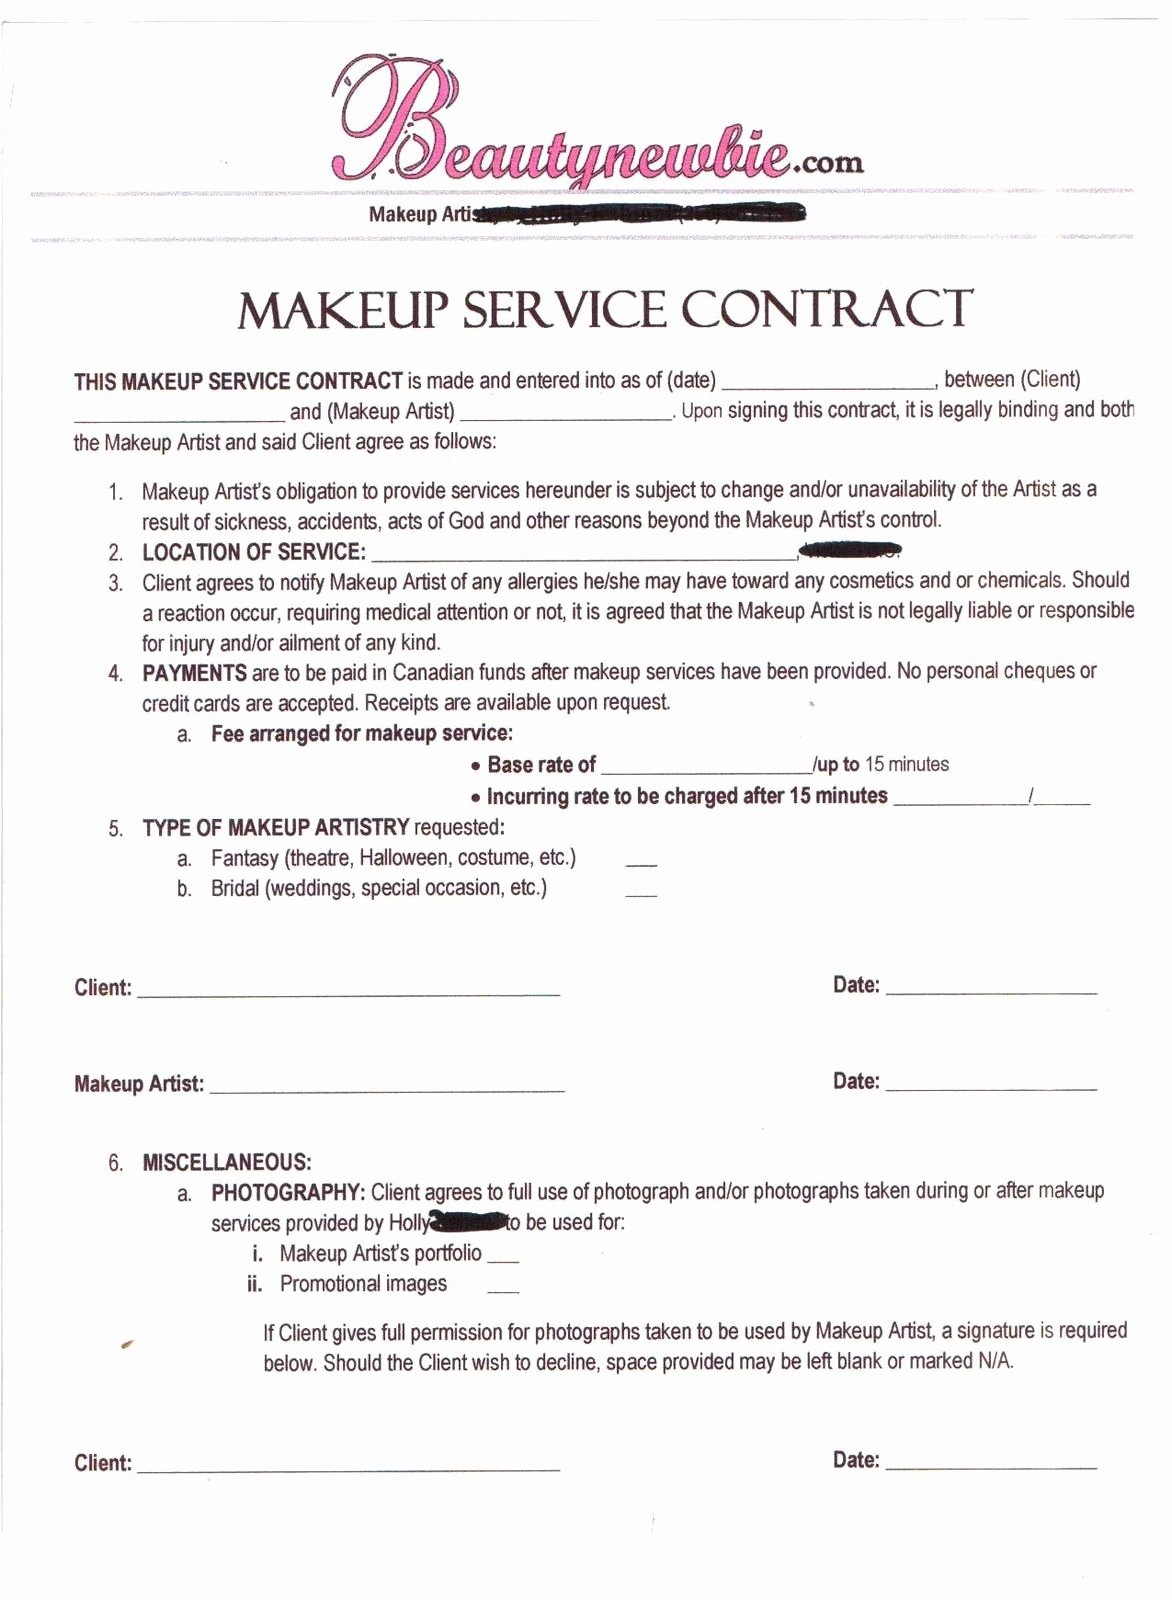 hair stylist contract for wedding awesome contract makeup artist of hair stylist contract for wedding